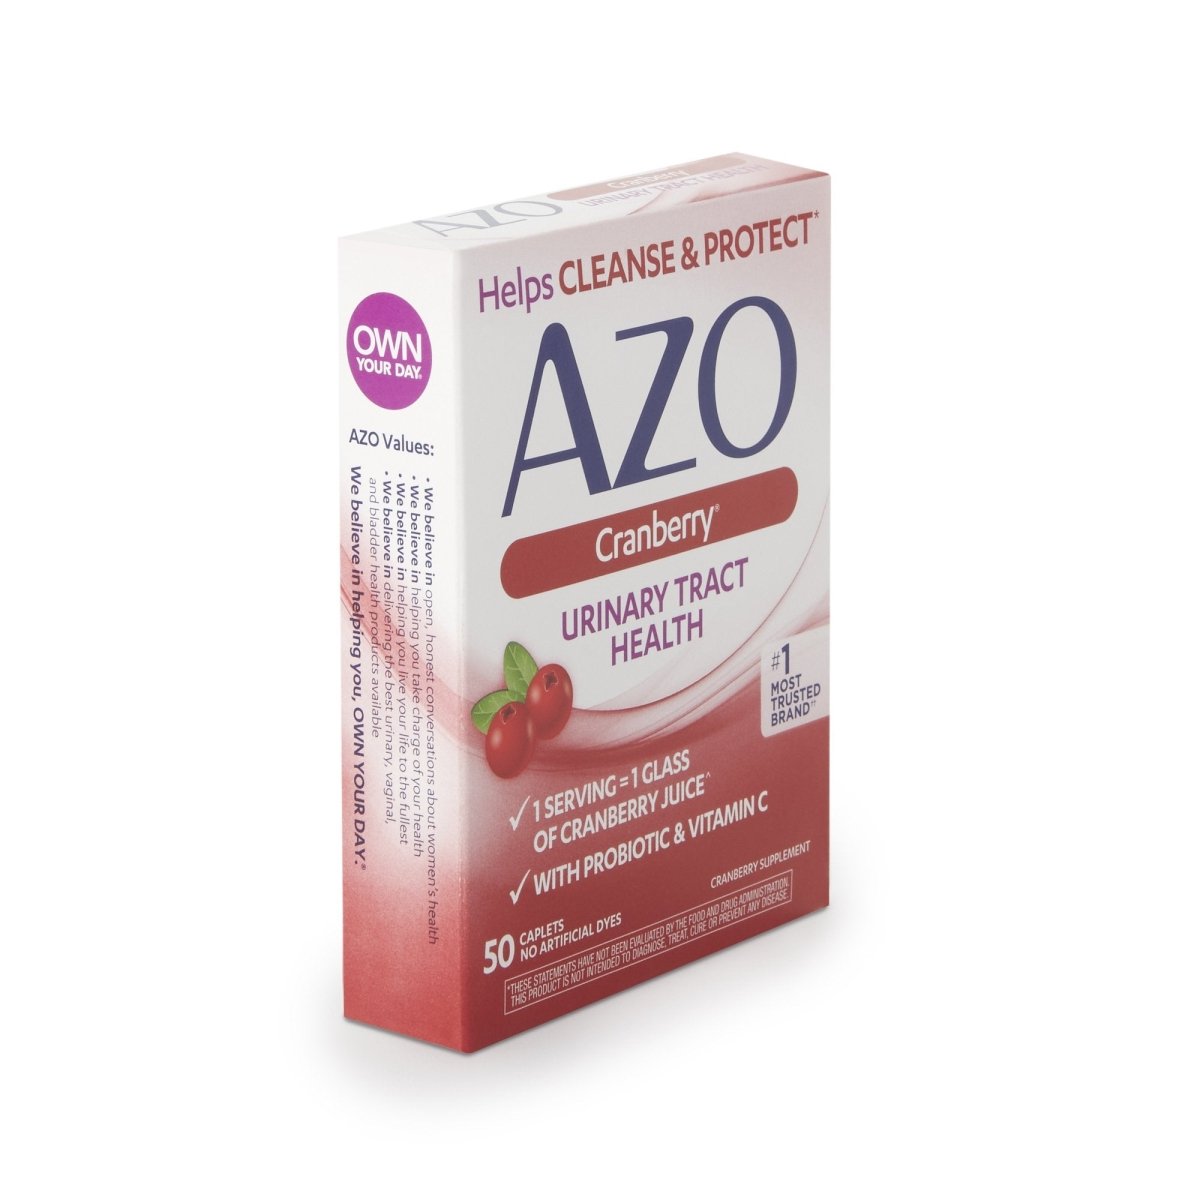 AZO Cranberry Urinary Tract Health Supplement - 884458_BX - 1